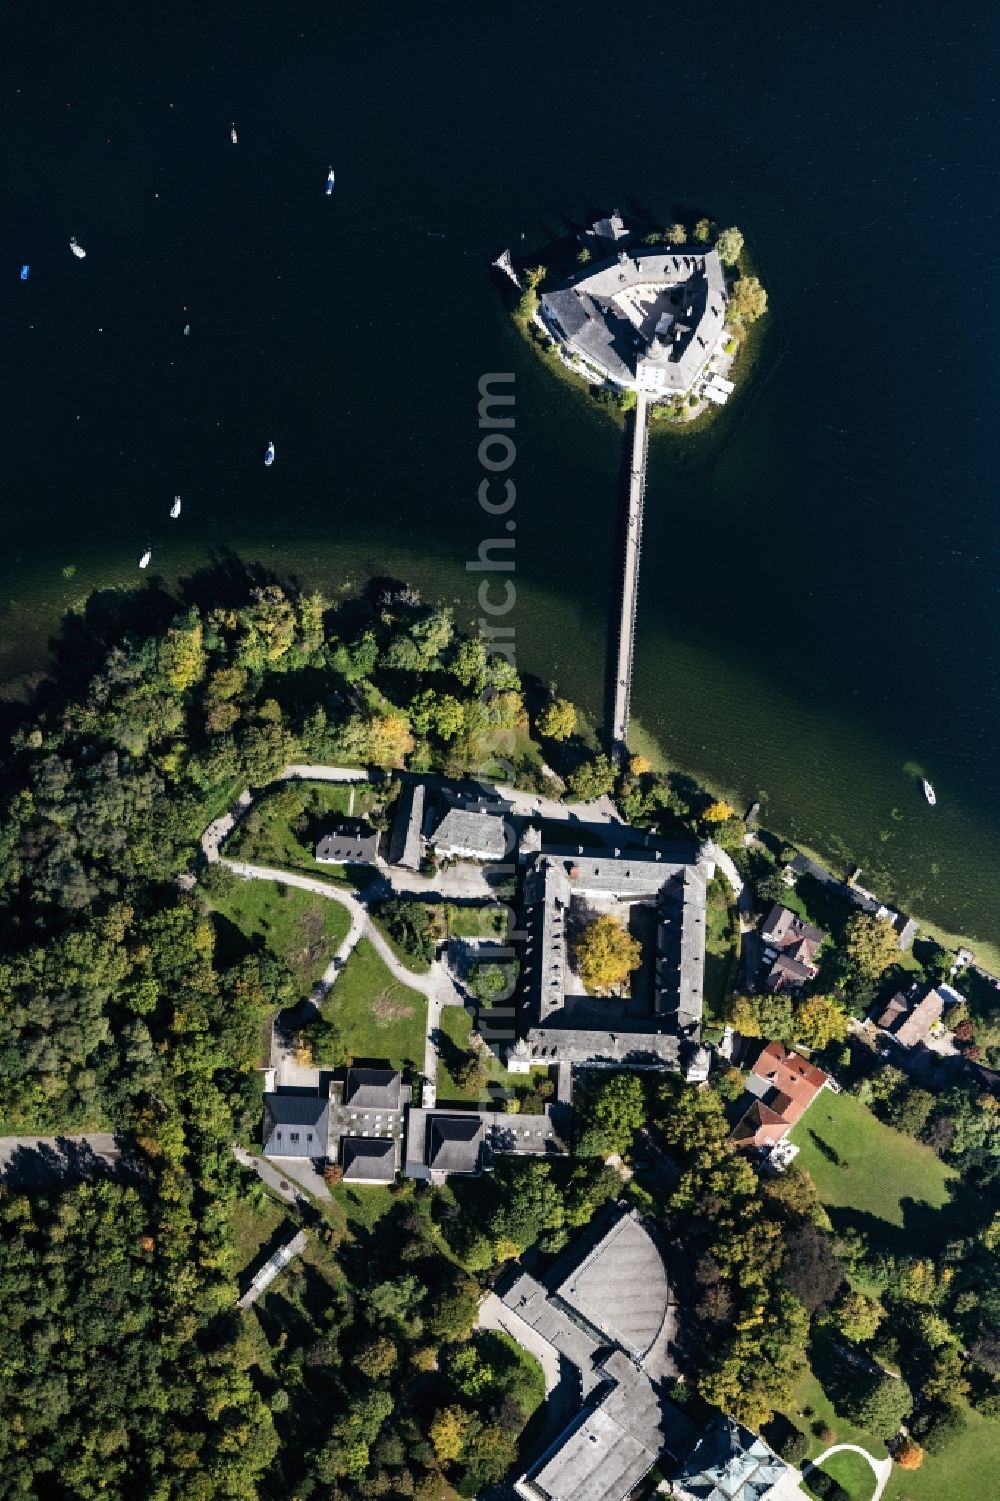 Gmunden from above - Building and castle park systems of water castle Seeschloss Orth on lake Traunsee in Gmunden in Oberoesterreich, Austria